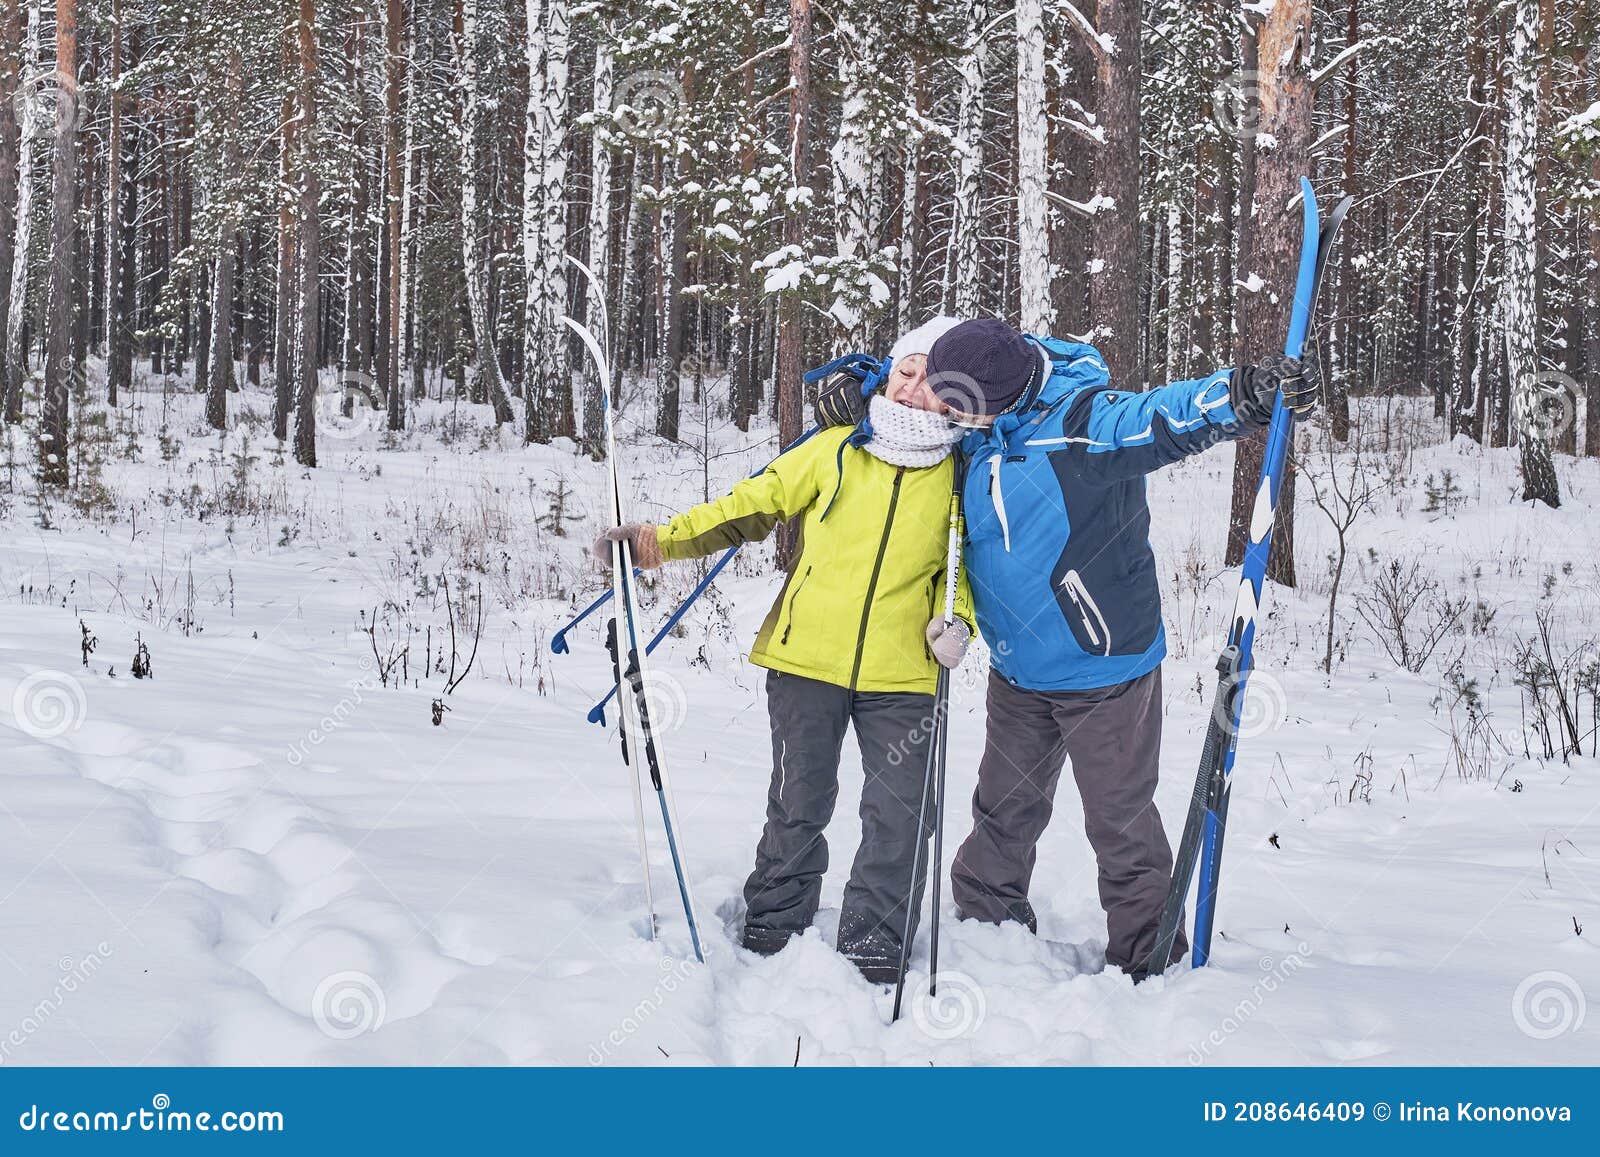 Mature Couple in Winter Sportswear with Cross-country Skis Kissing in Snowy  Forest Stock Image - Image of cold, countryside: 208646409